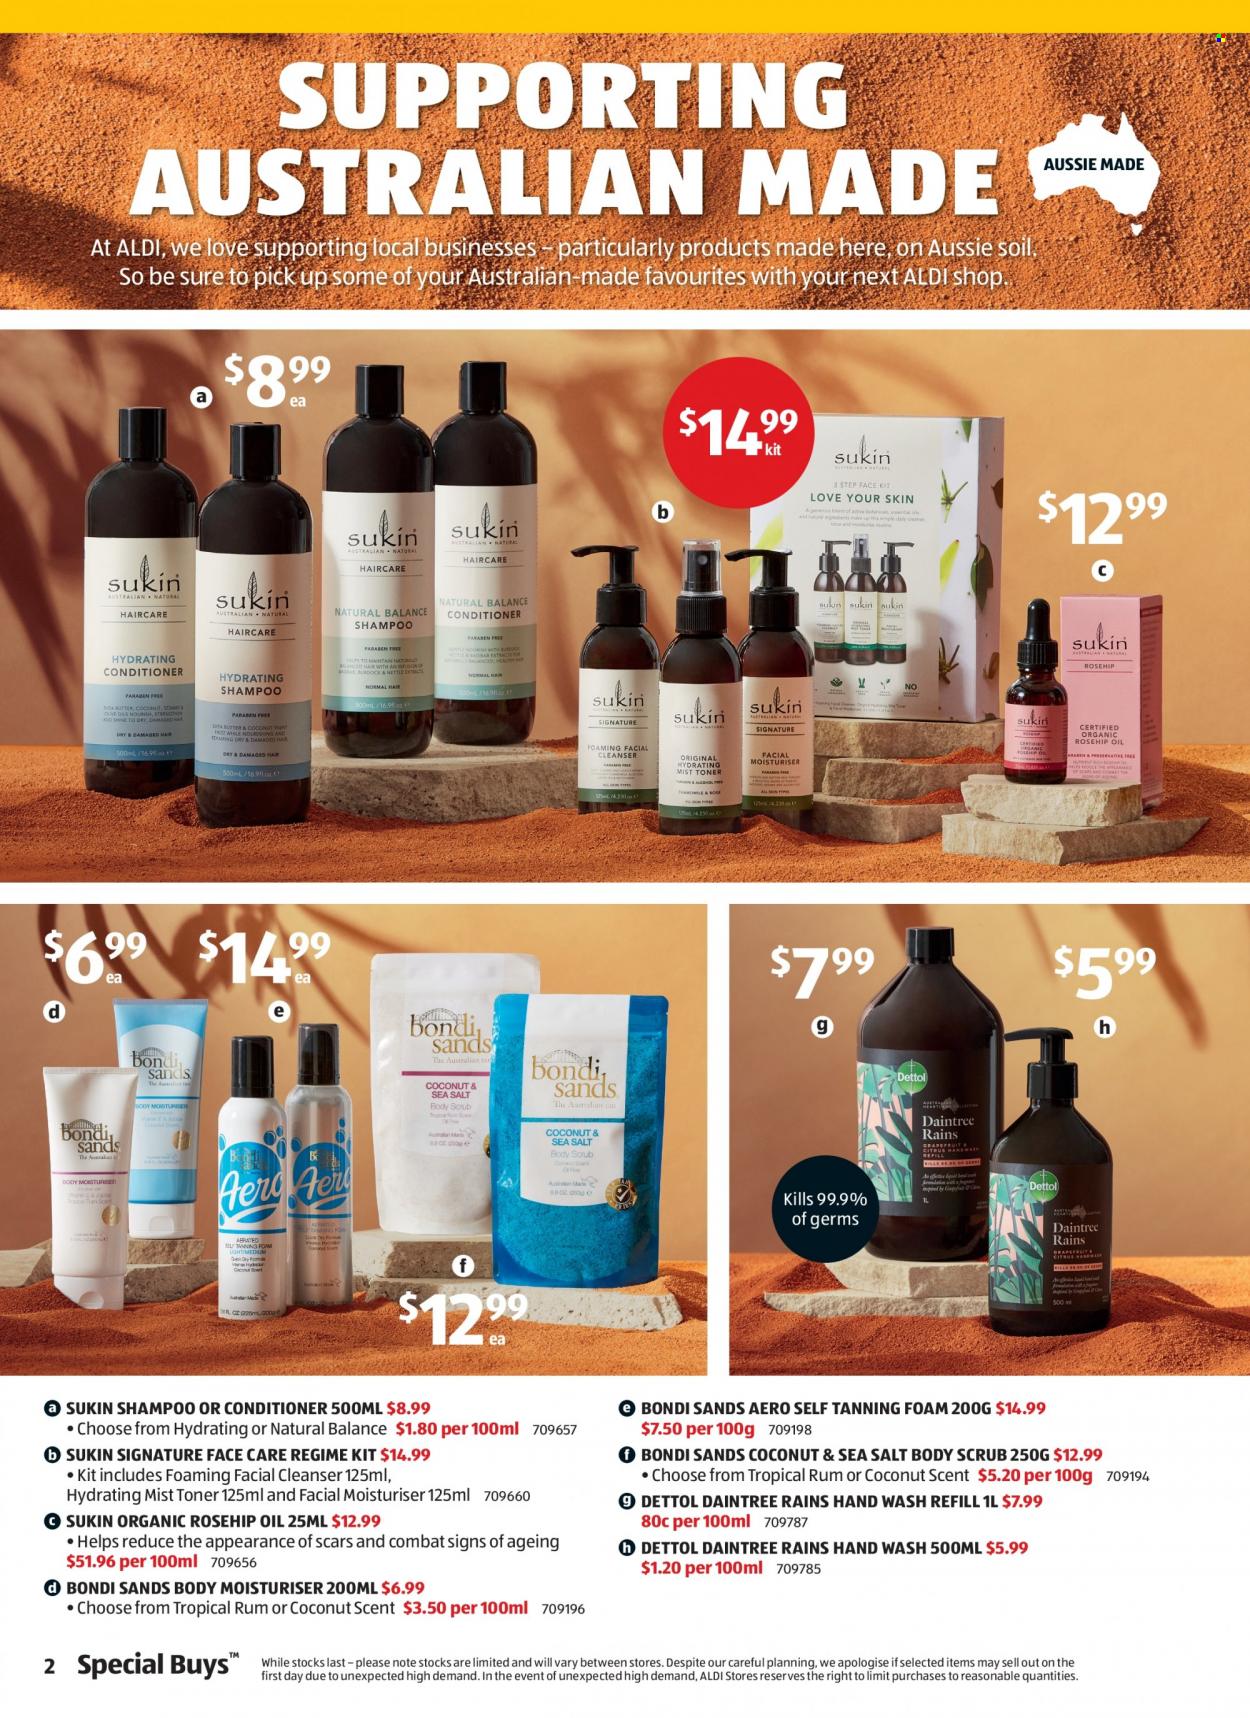 ALDI Catalogue - 12 May 2022 - 18 May 2022 - Sales products - oil, rum, Dettol, shampoo, hand wash, cleanser, toner, Bondi Sands, rosehip oil, Aussie, conditioner, Sukin, body scrub, self tanning foam, Sure, Natural Balance. Page 2.